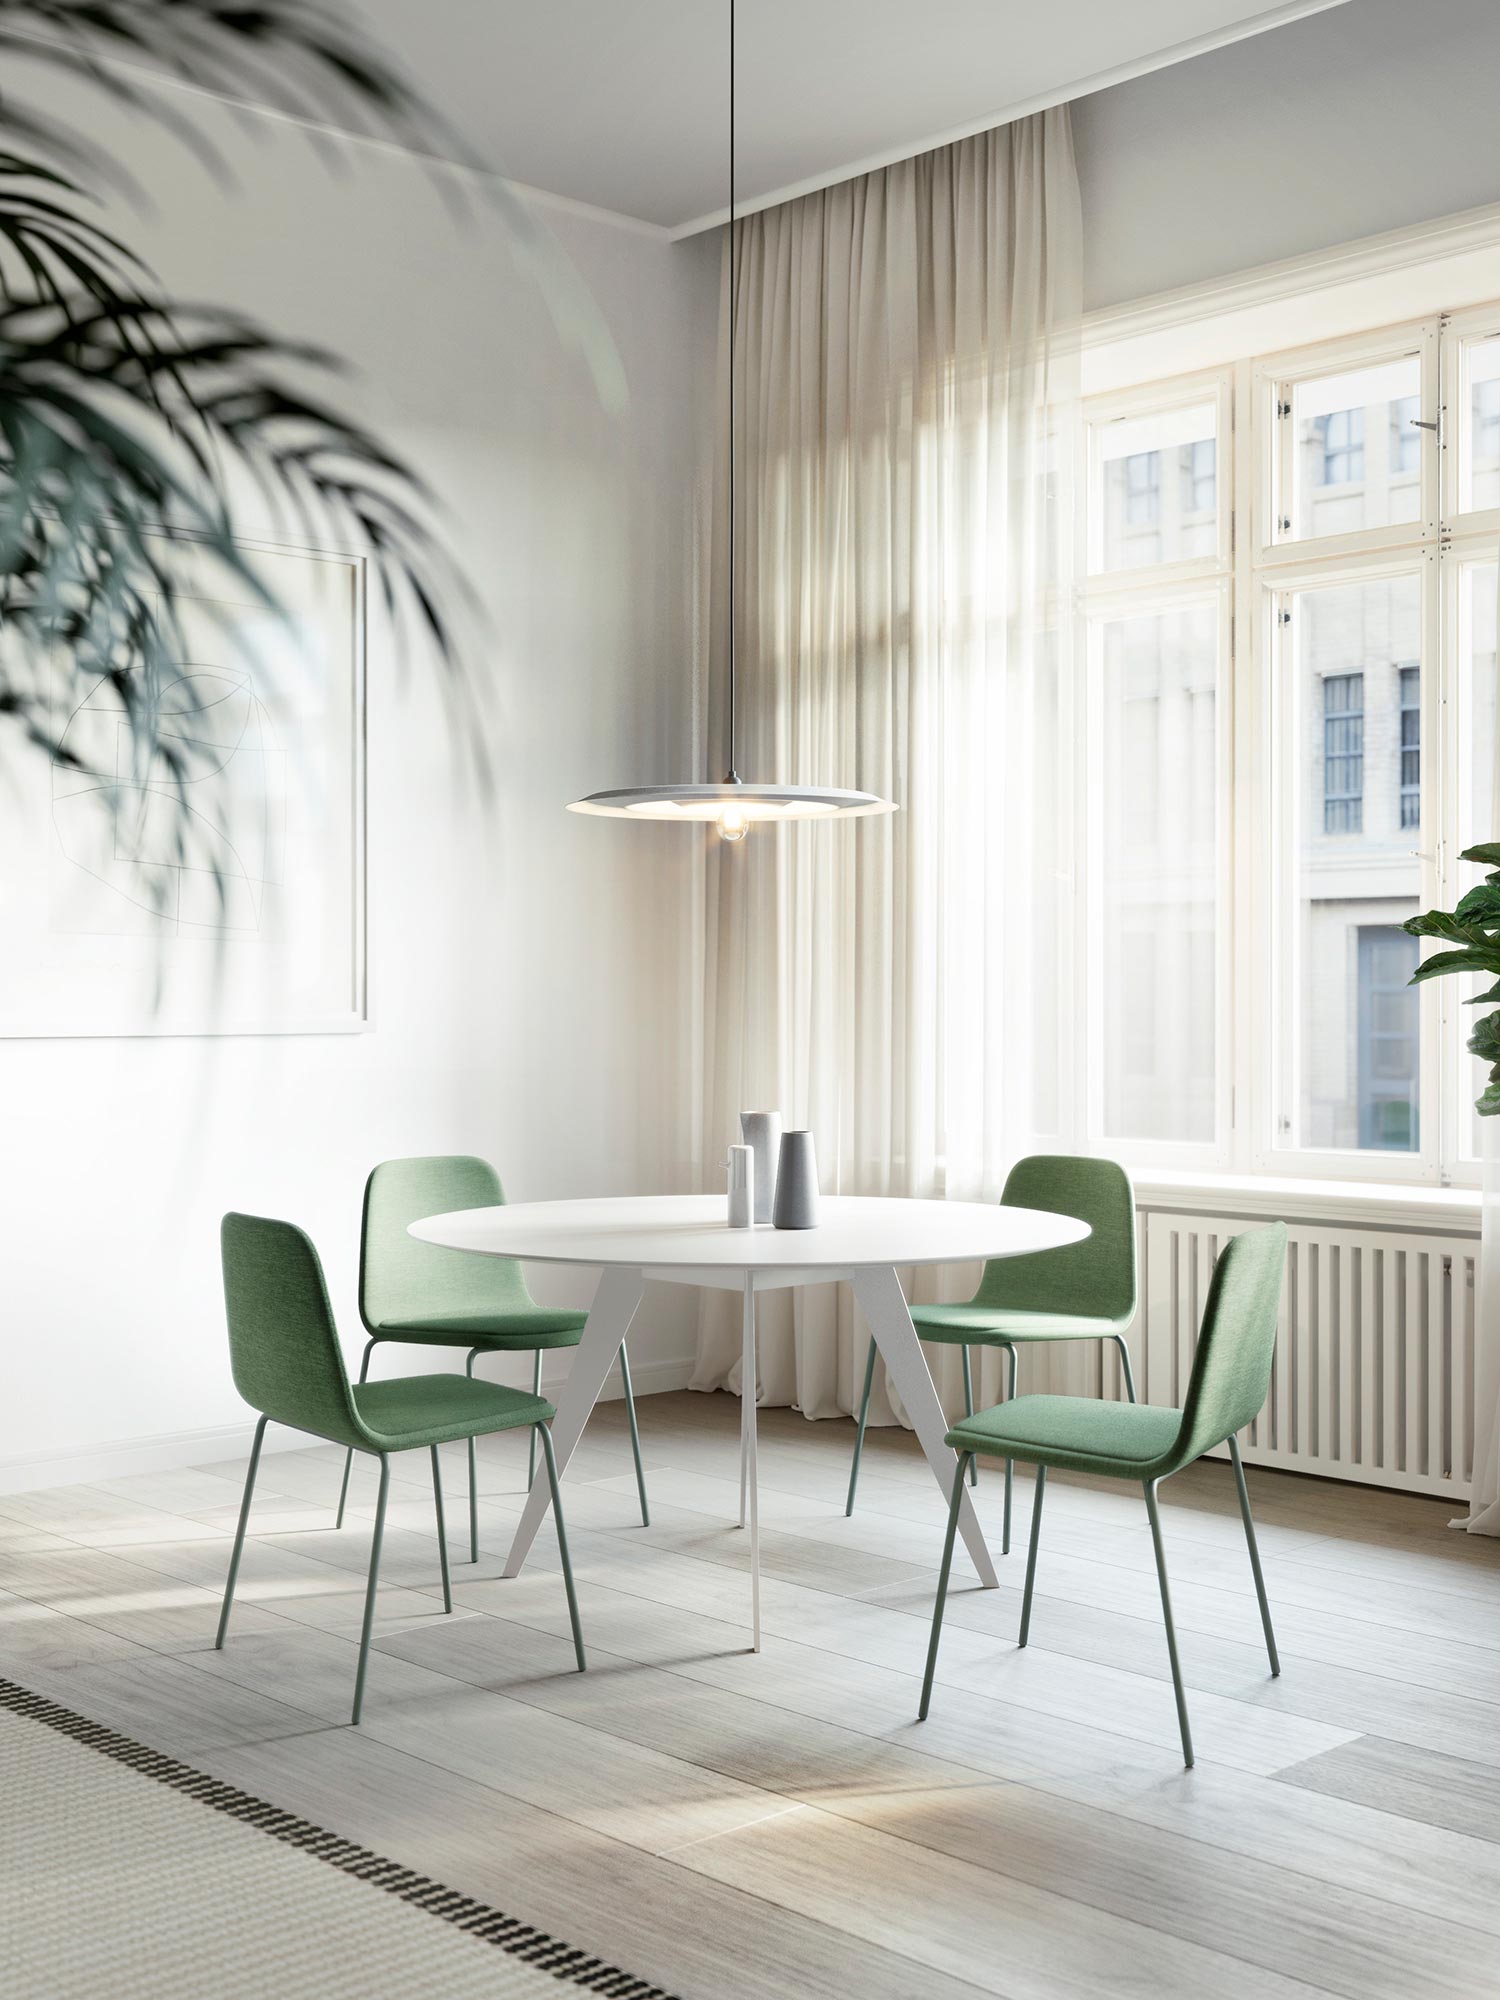 Treku Bisell Chair Fusion Crevin Green With Moss Green Lacquered Metal Legs With A Treku Round Aise Table In White Fenix Top White Lacquered Legs